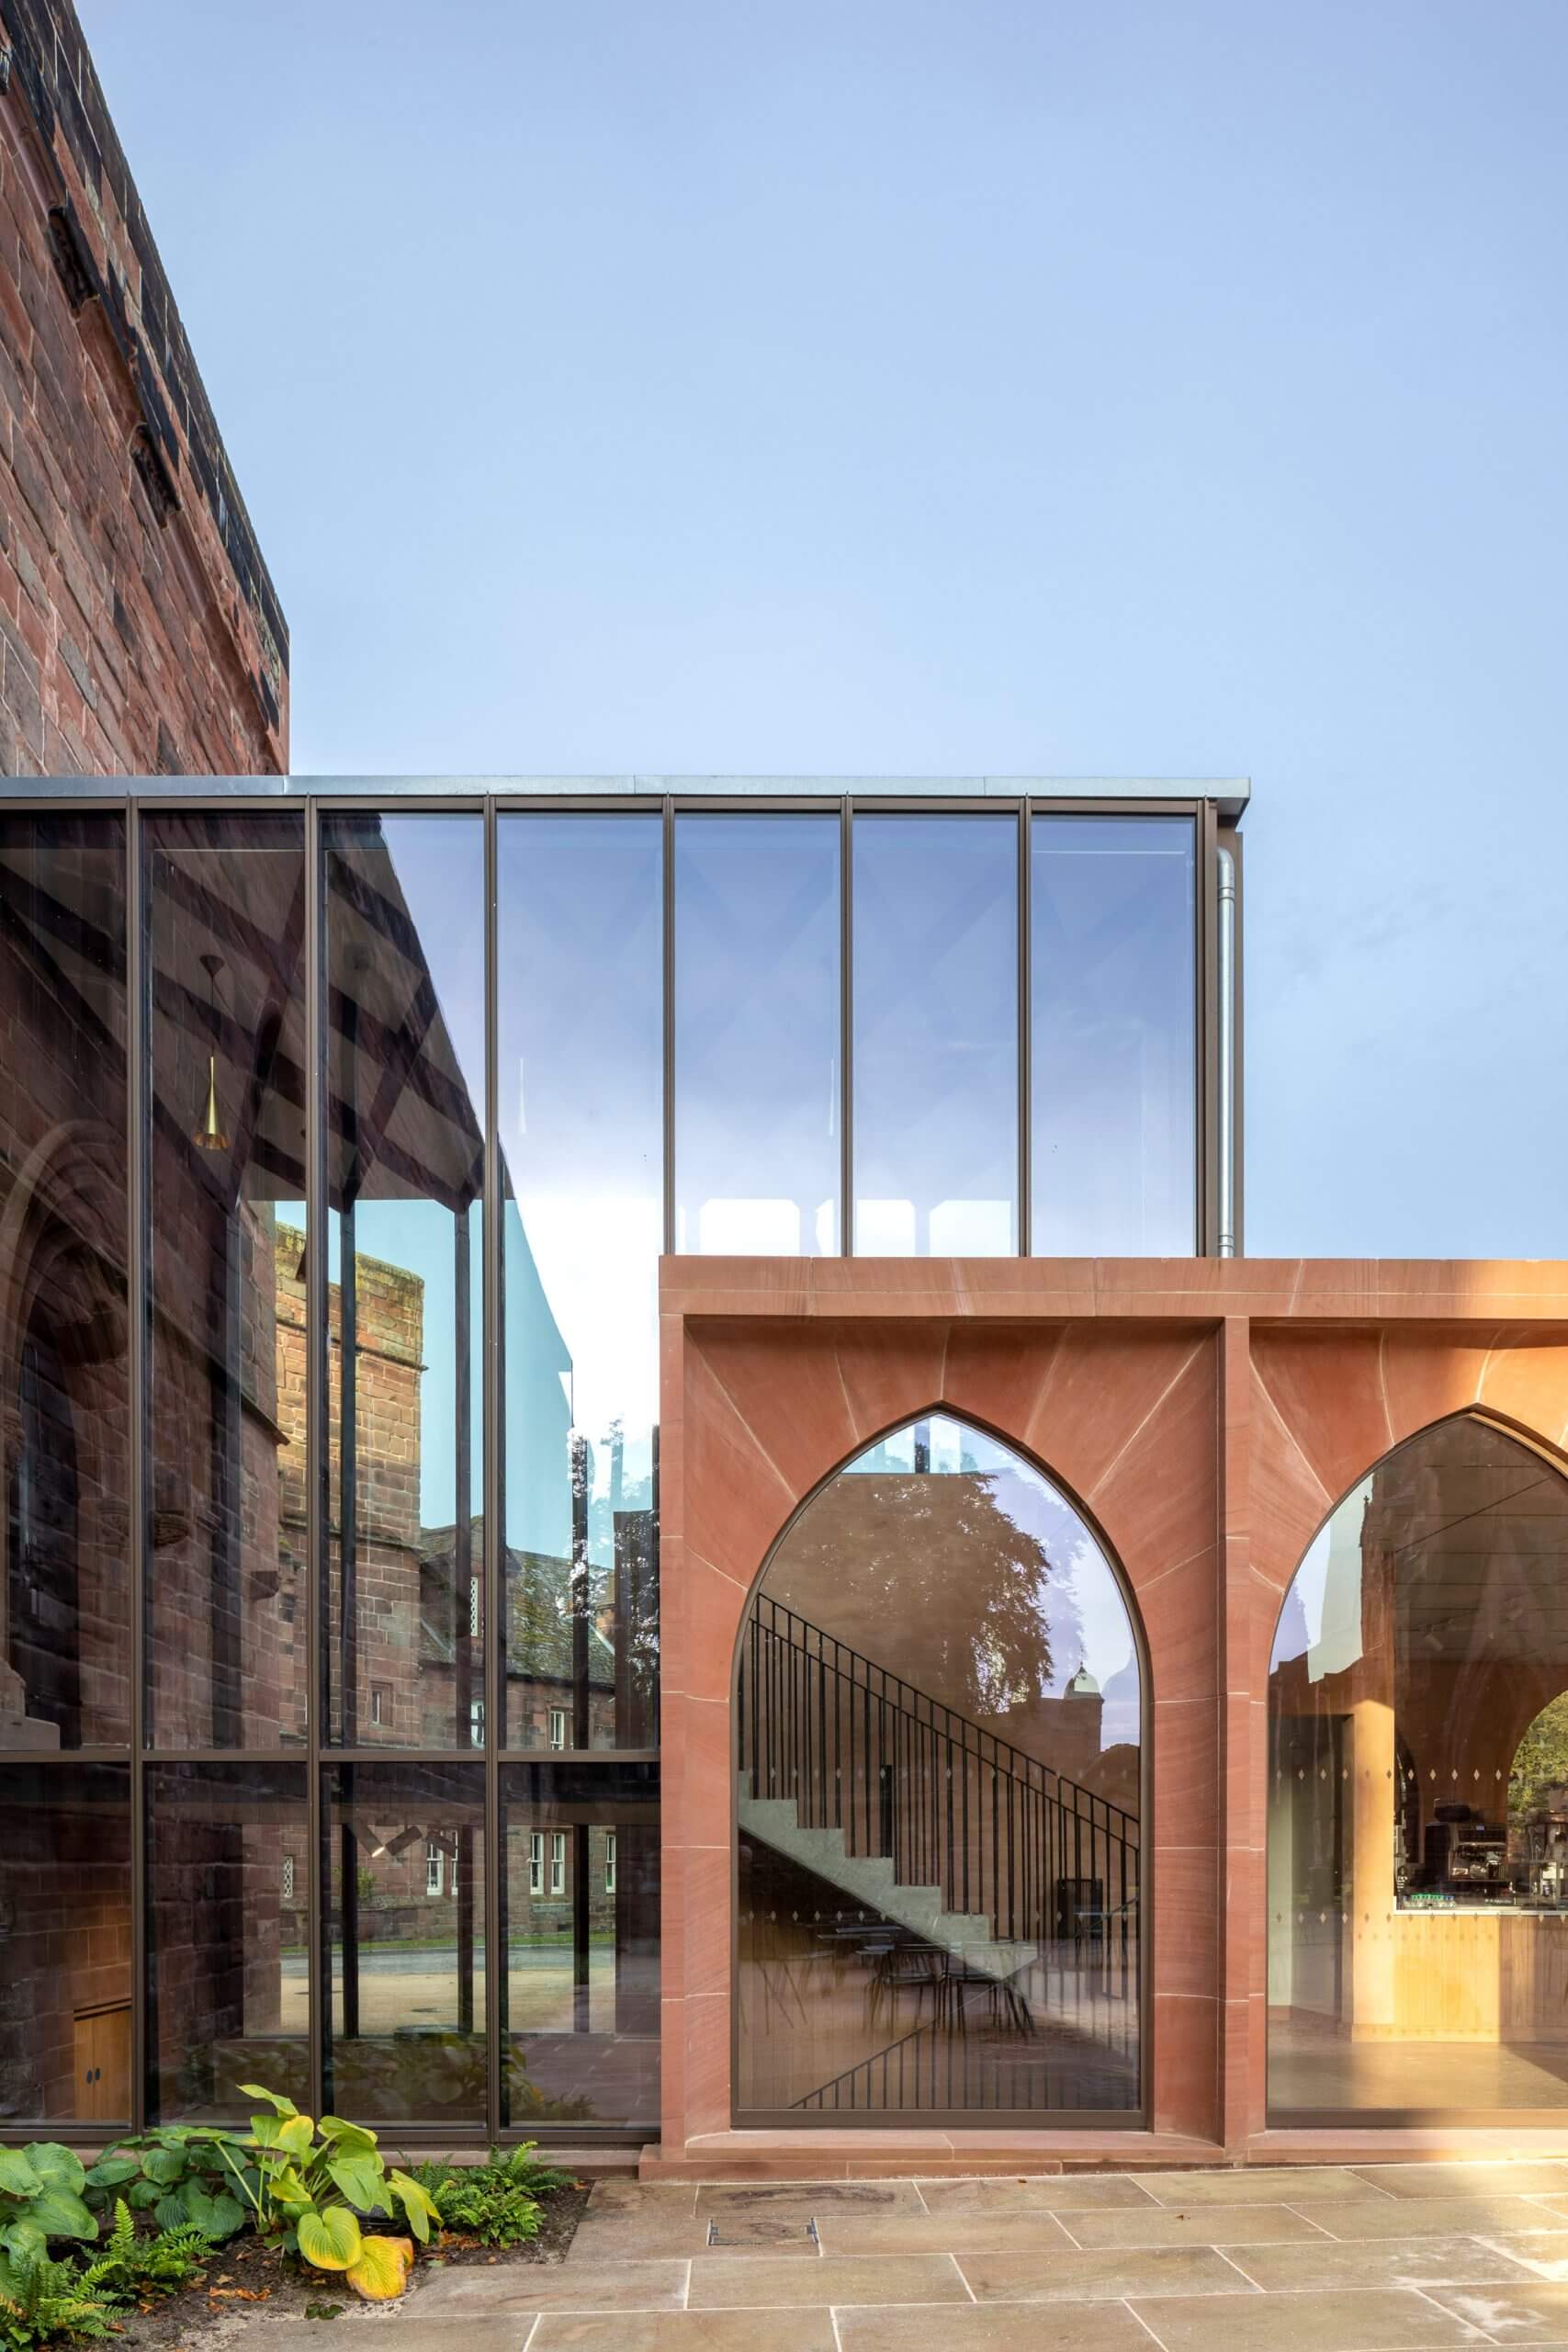 A stone arched facade meeting a cubic glass volume